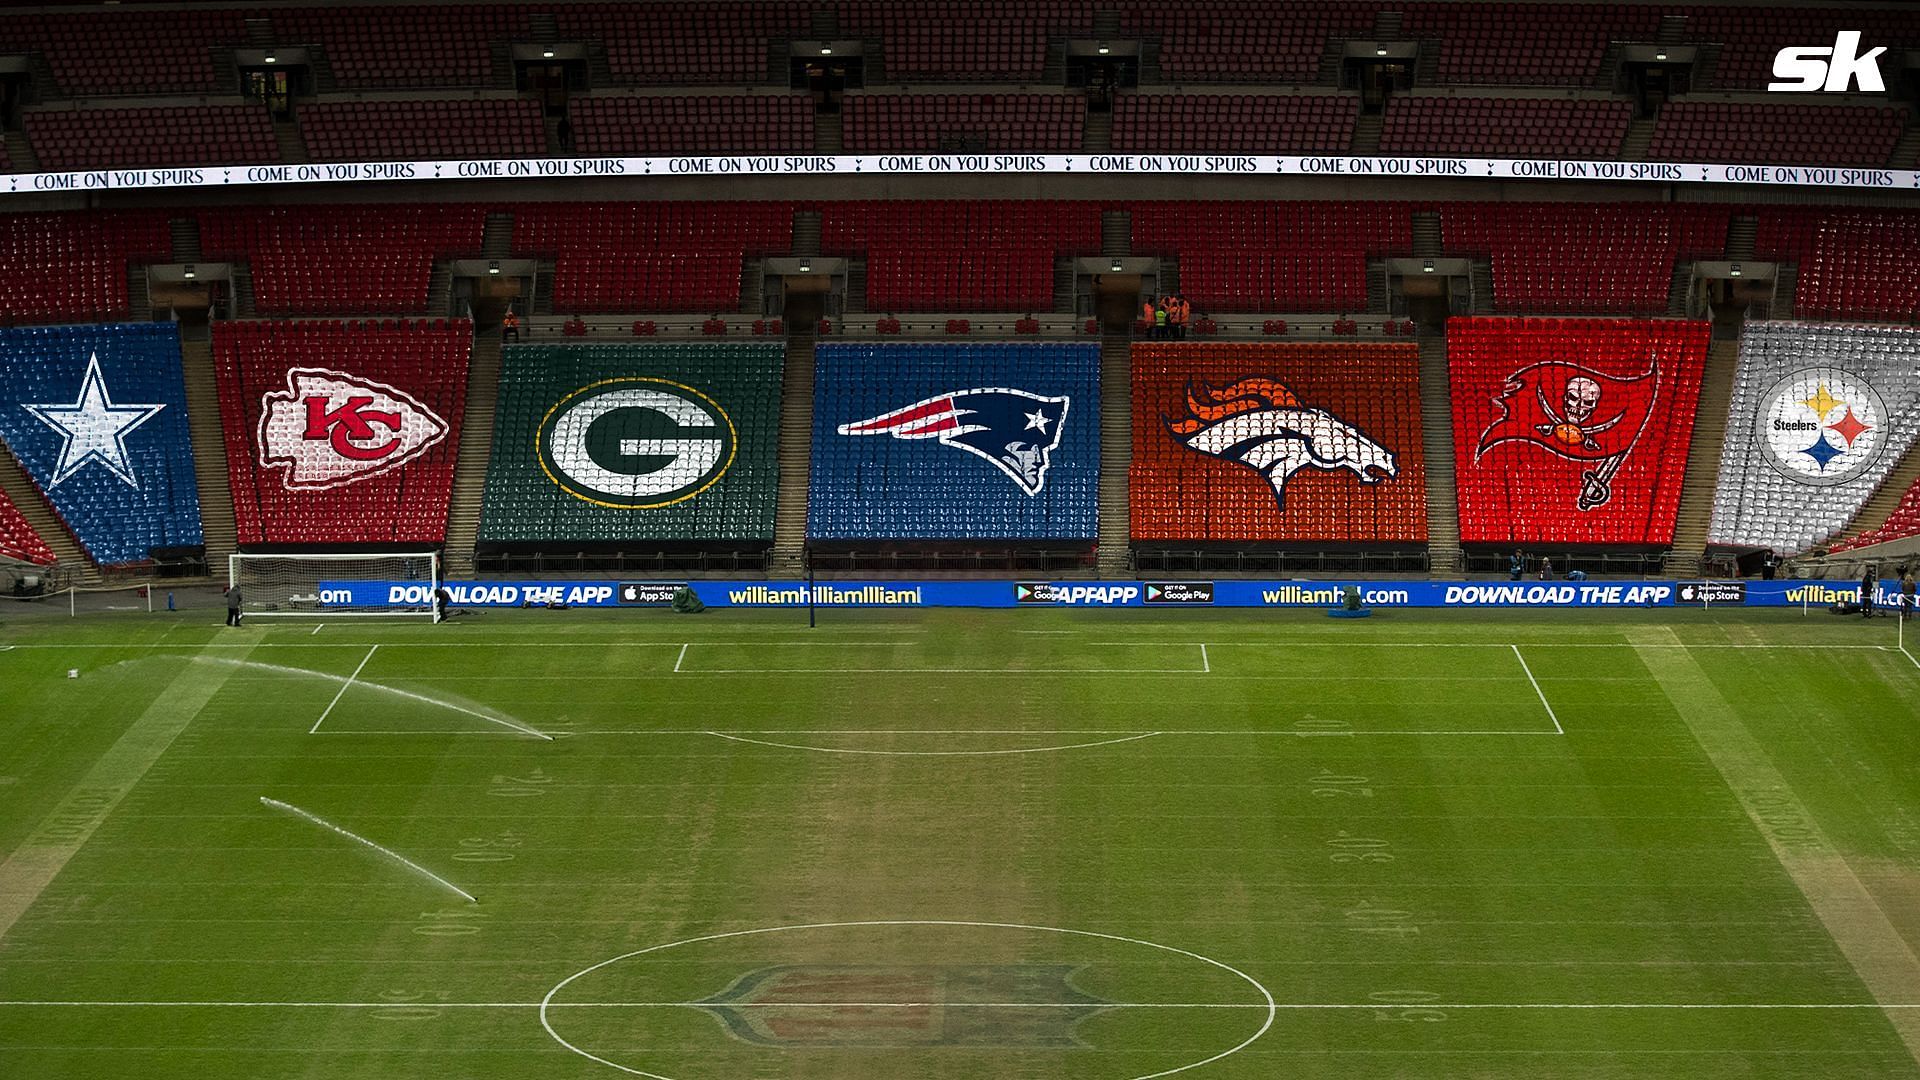 What are the five winningest franchises in NFL history ahead of 2022?